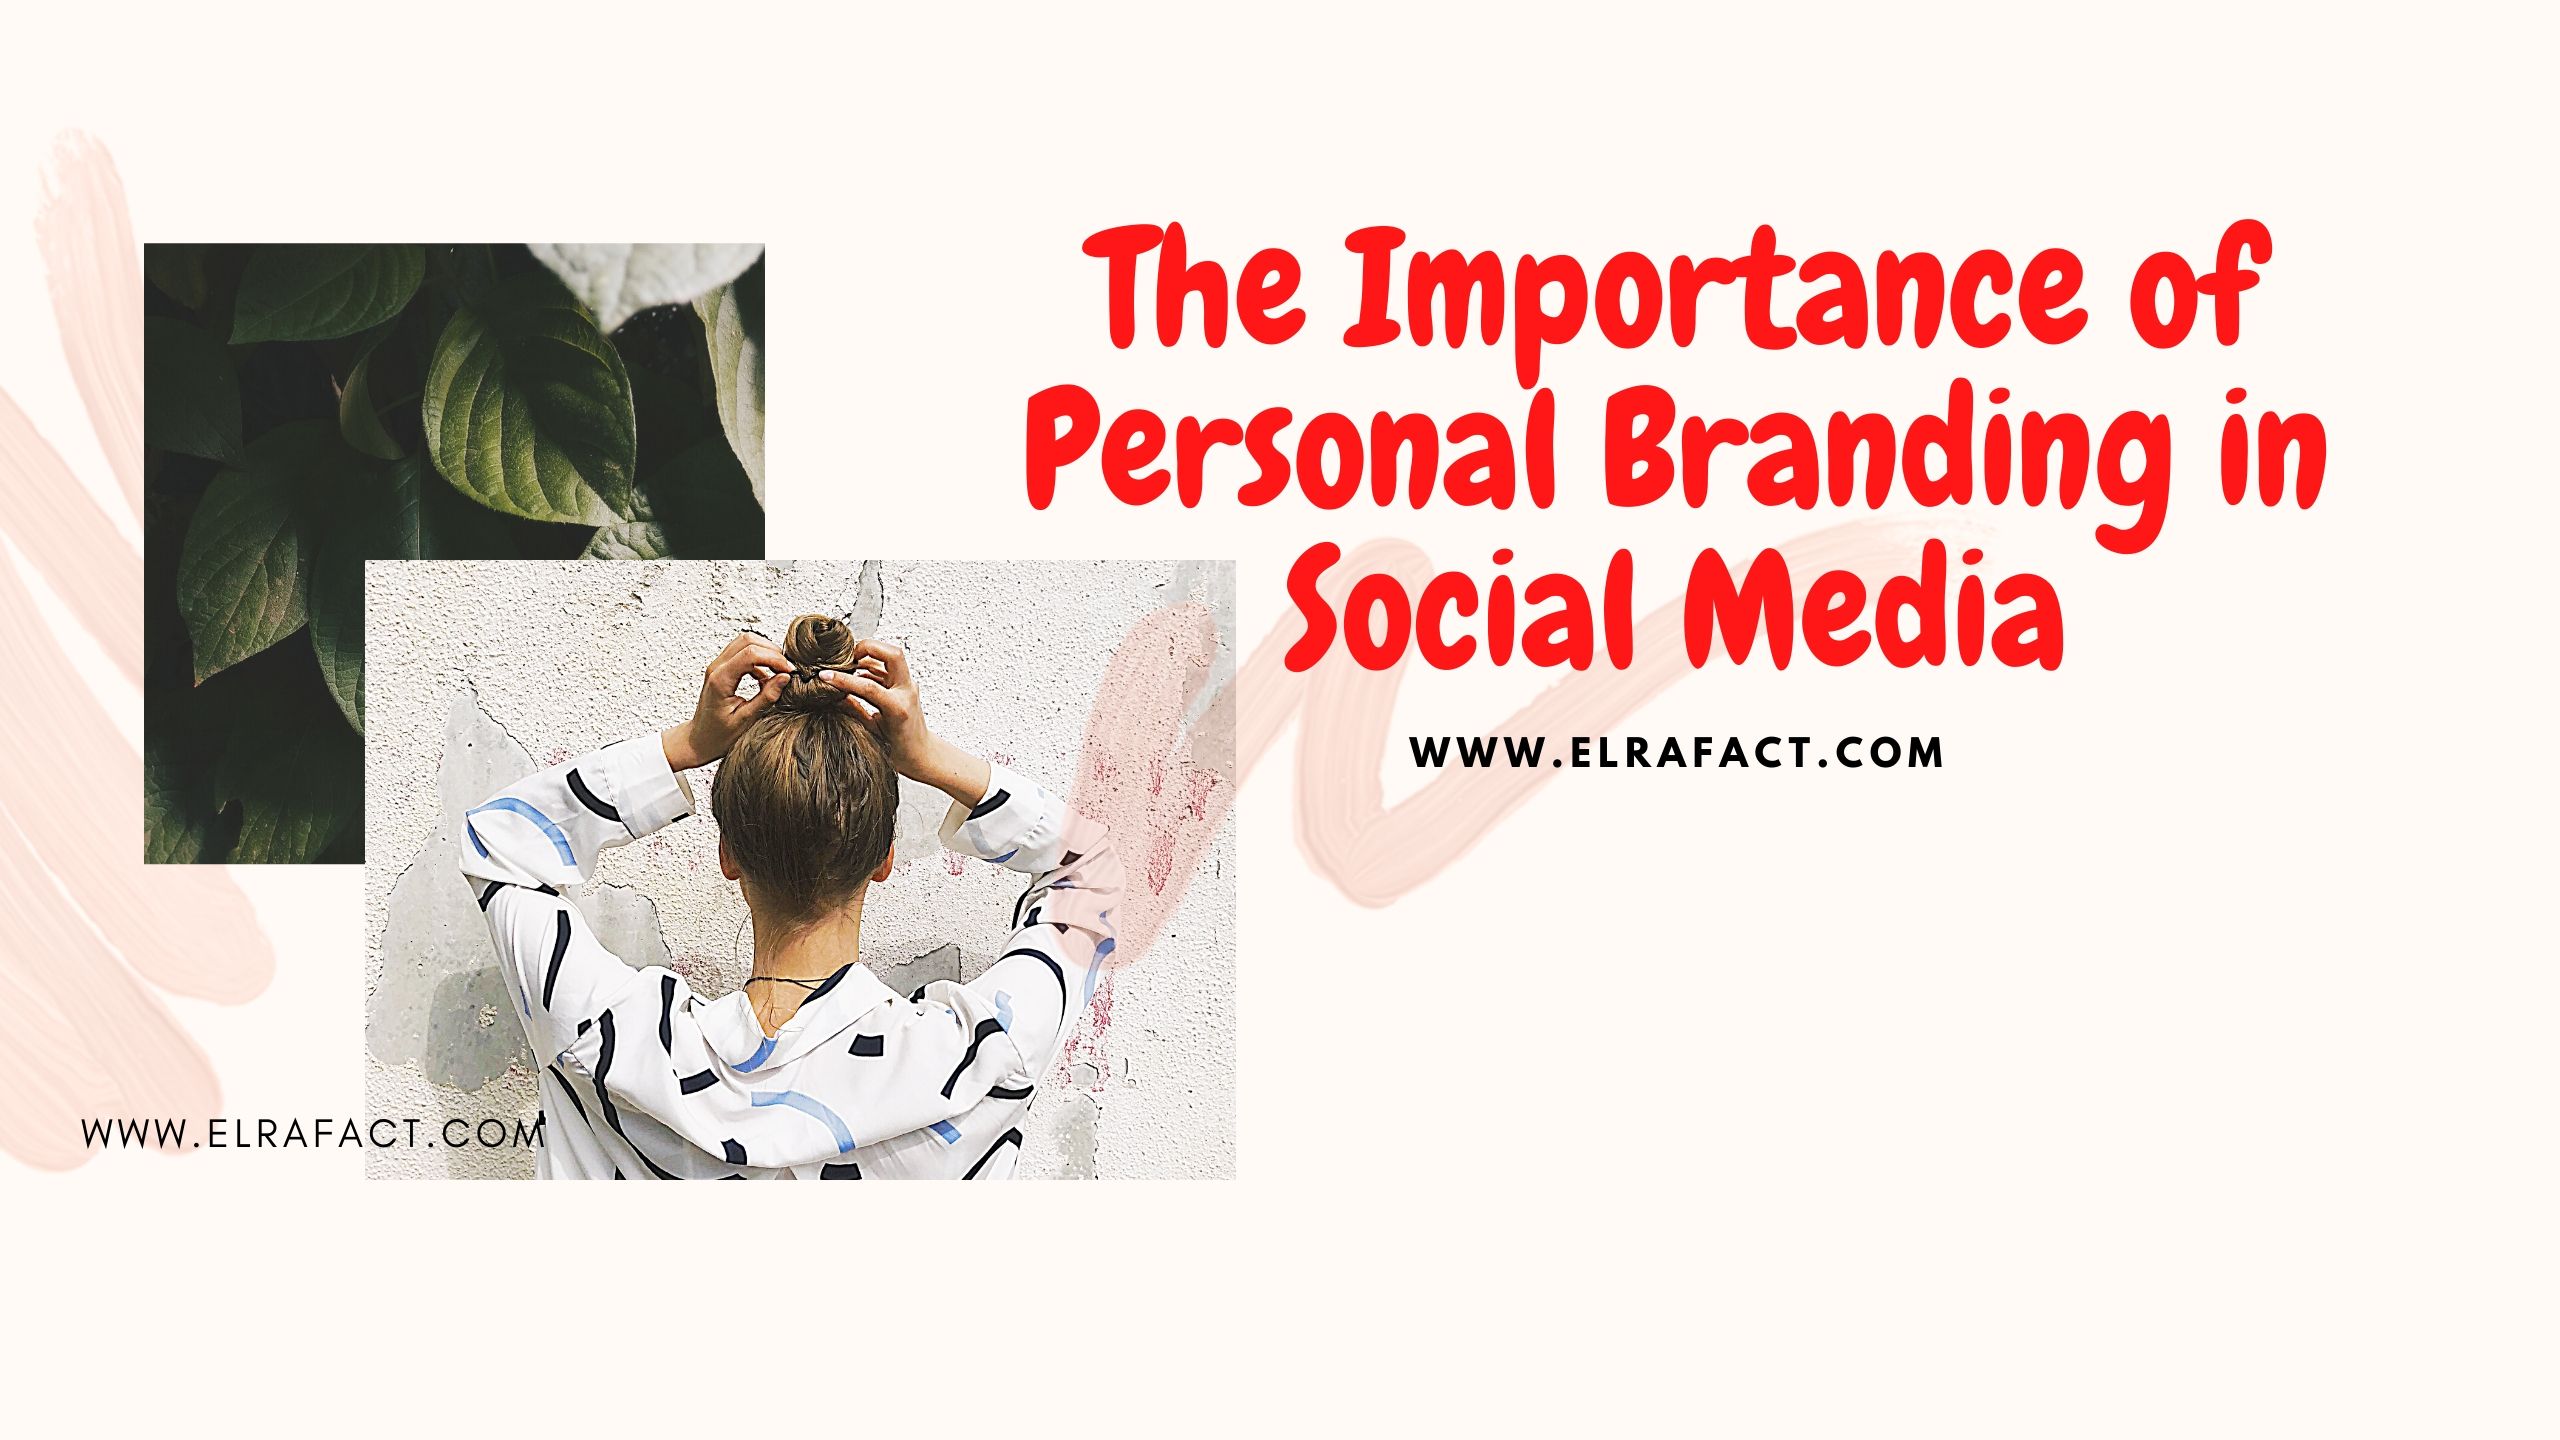 The Importance of Personal Branding in Social Media